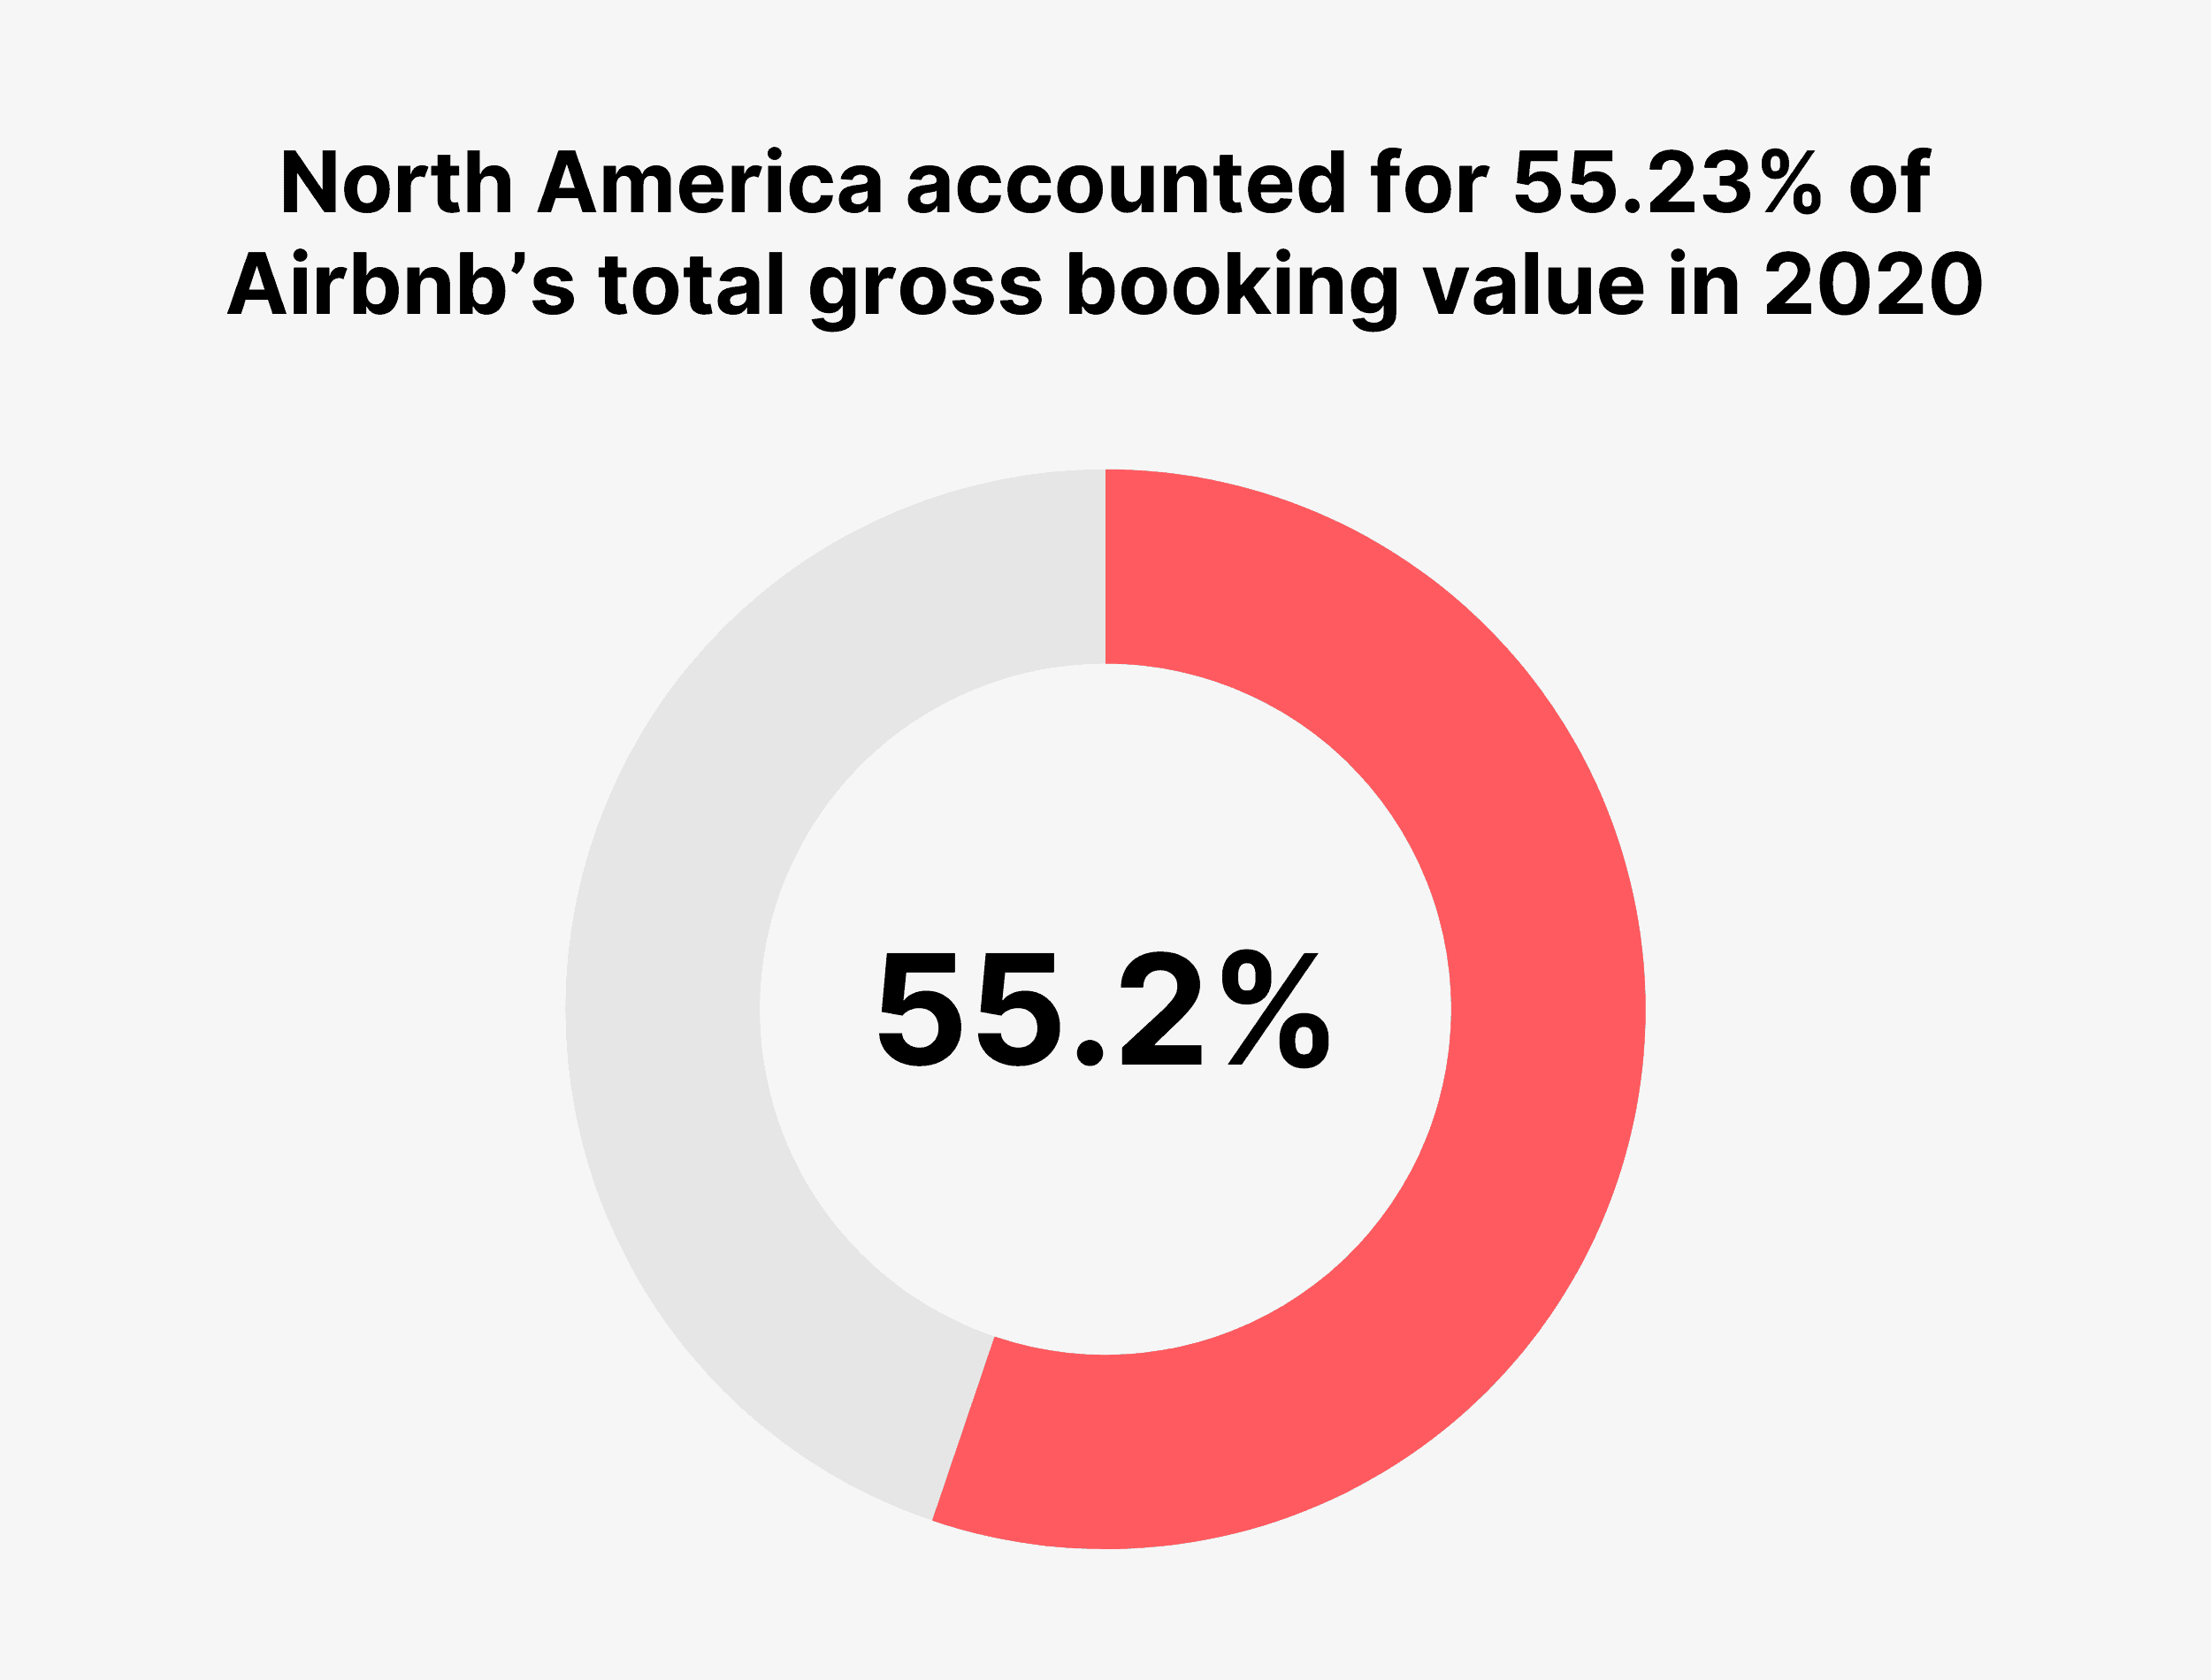 North America accounted for 55.23% of Airbnb’s total gross booking value in 2020